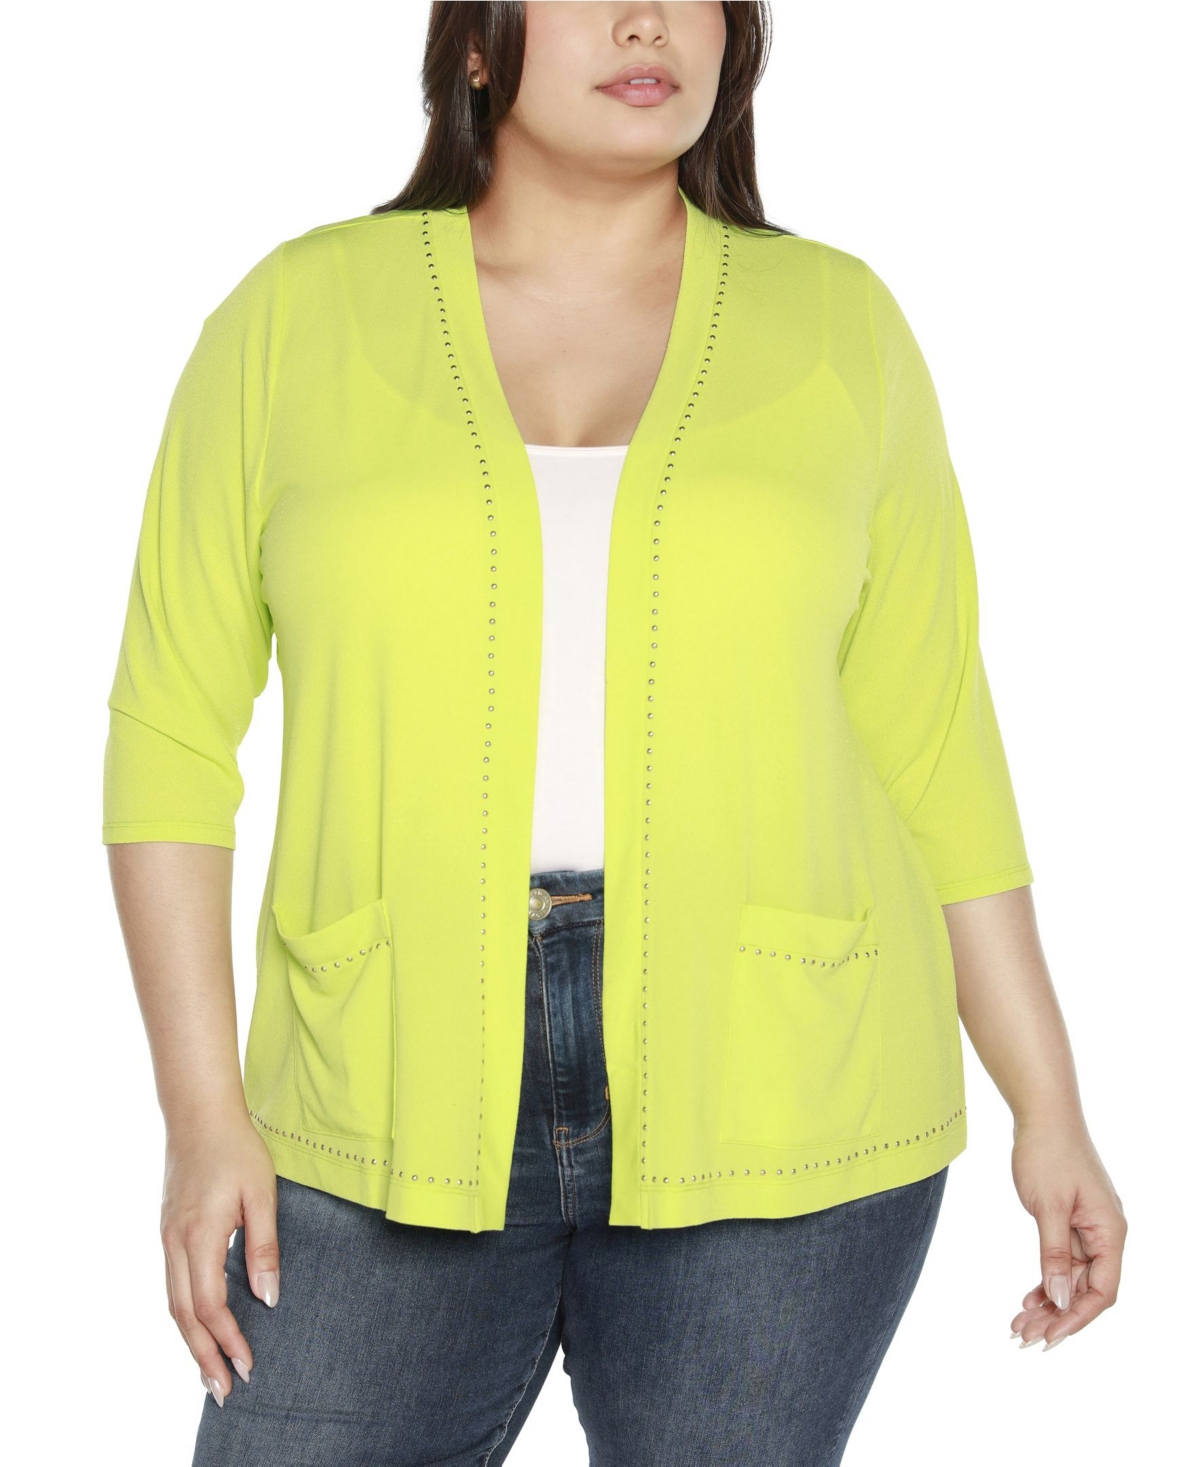 Shop Belldini Black Label Plus Size Embellished Open-front Knit Cardigan Sweater In Key Lime